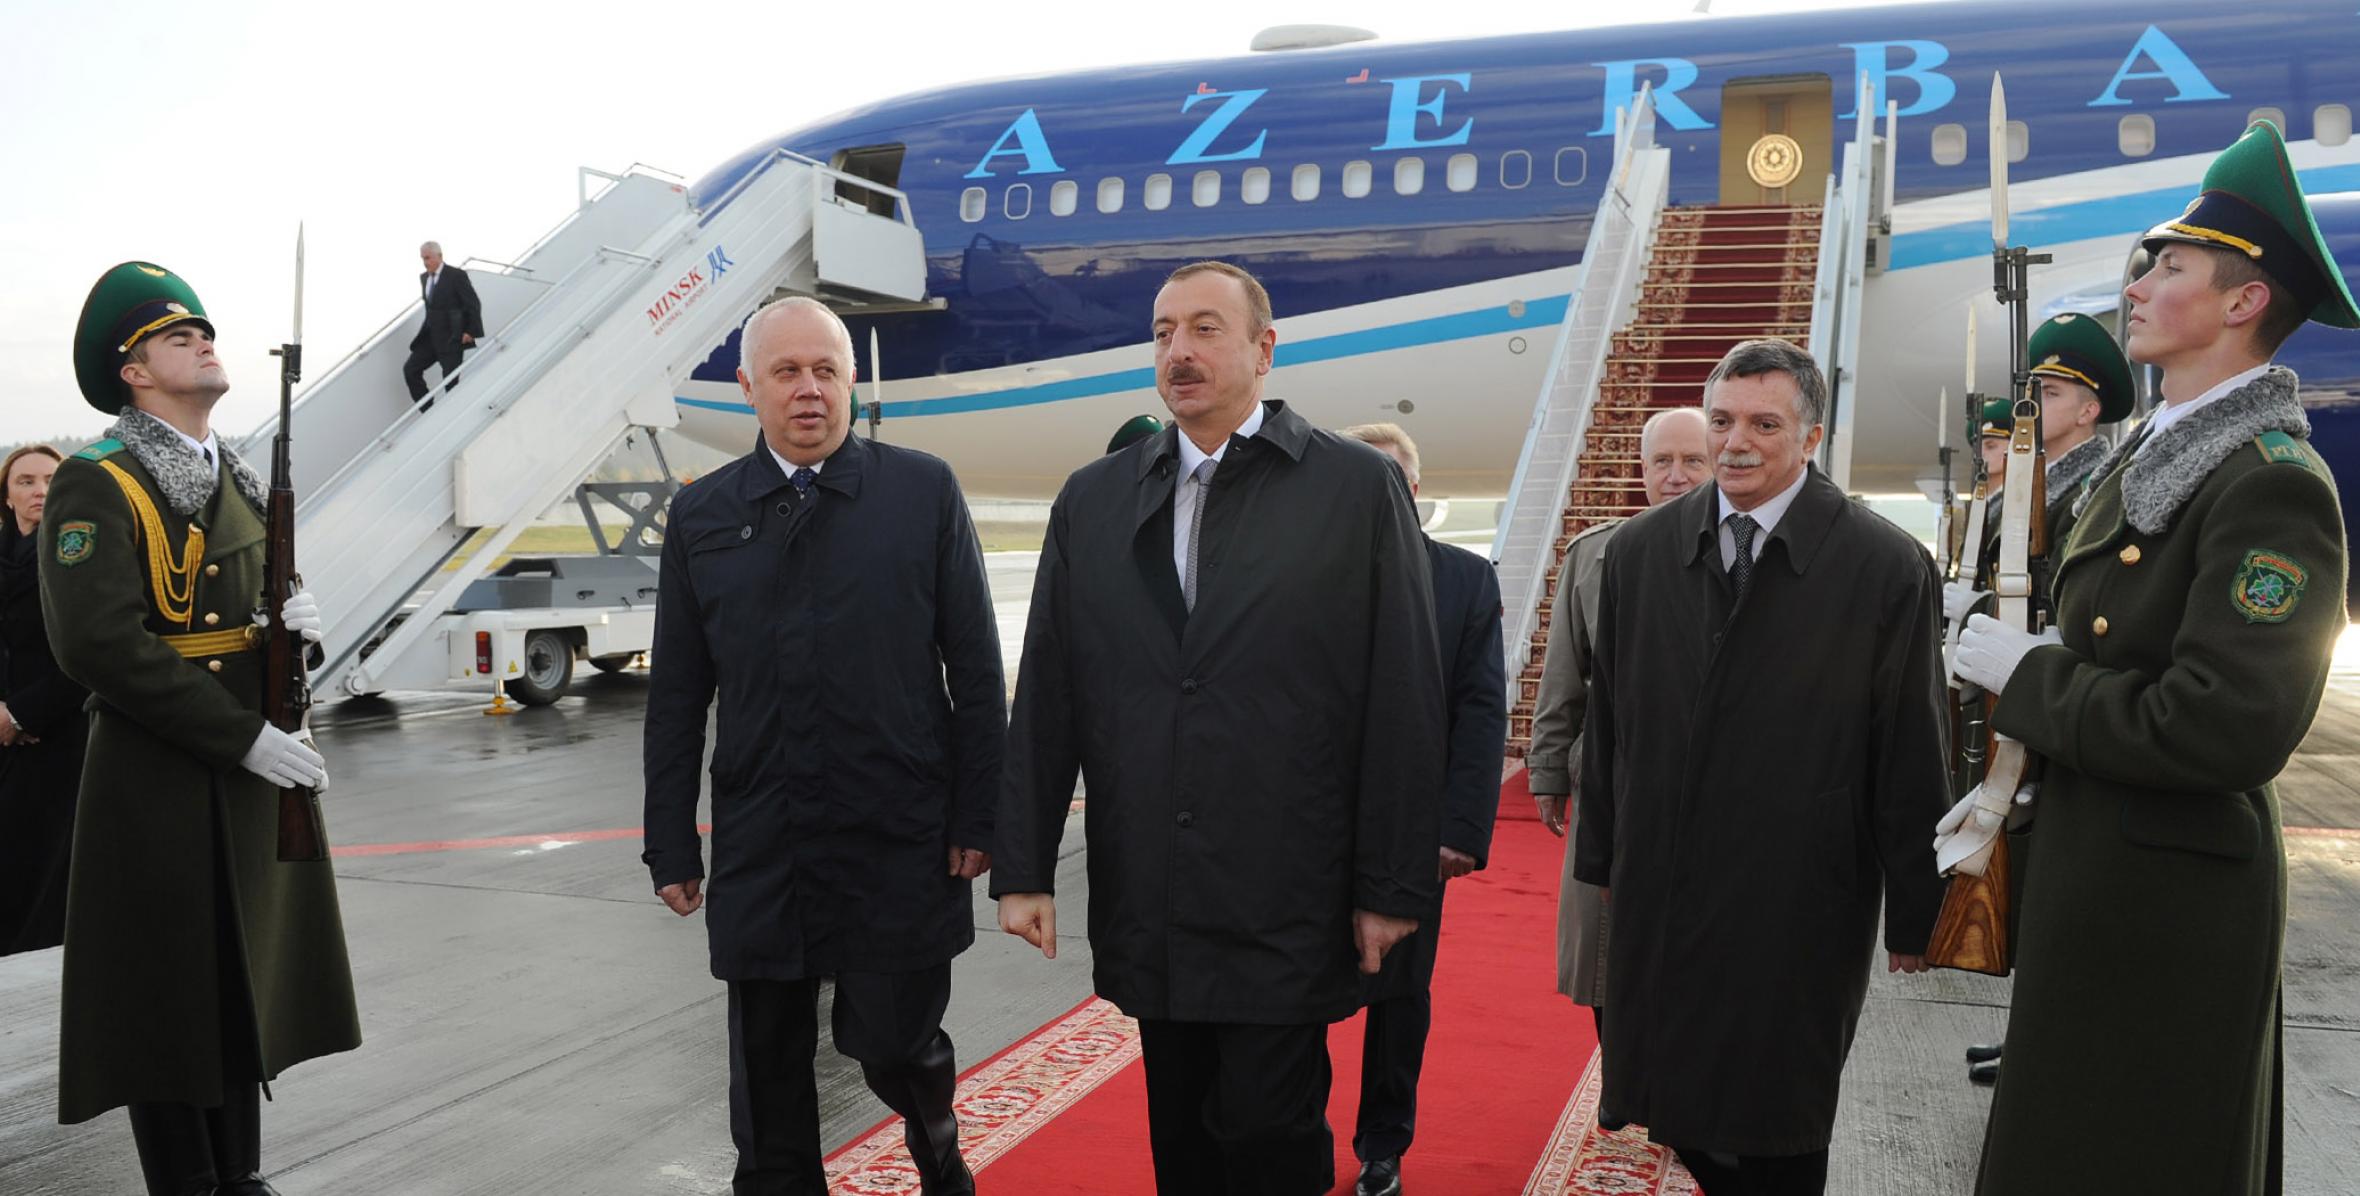 Ilham Aliyev arrived in Minsk to attend a meeting of the Council of the CIS Heads of State